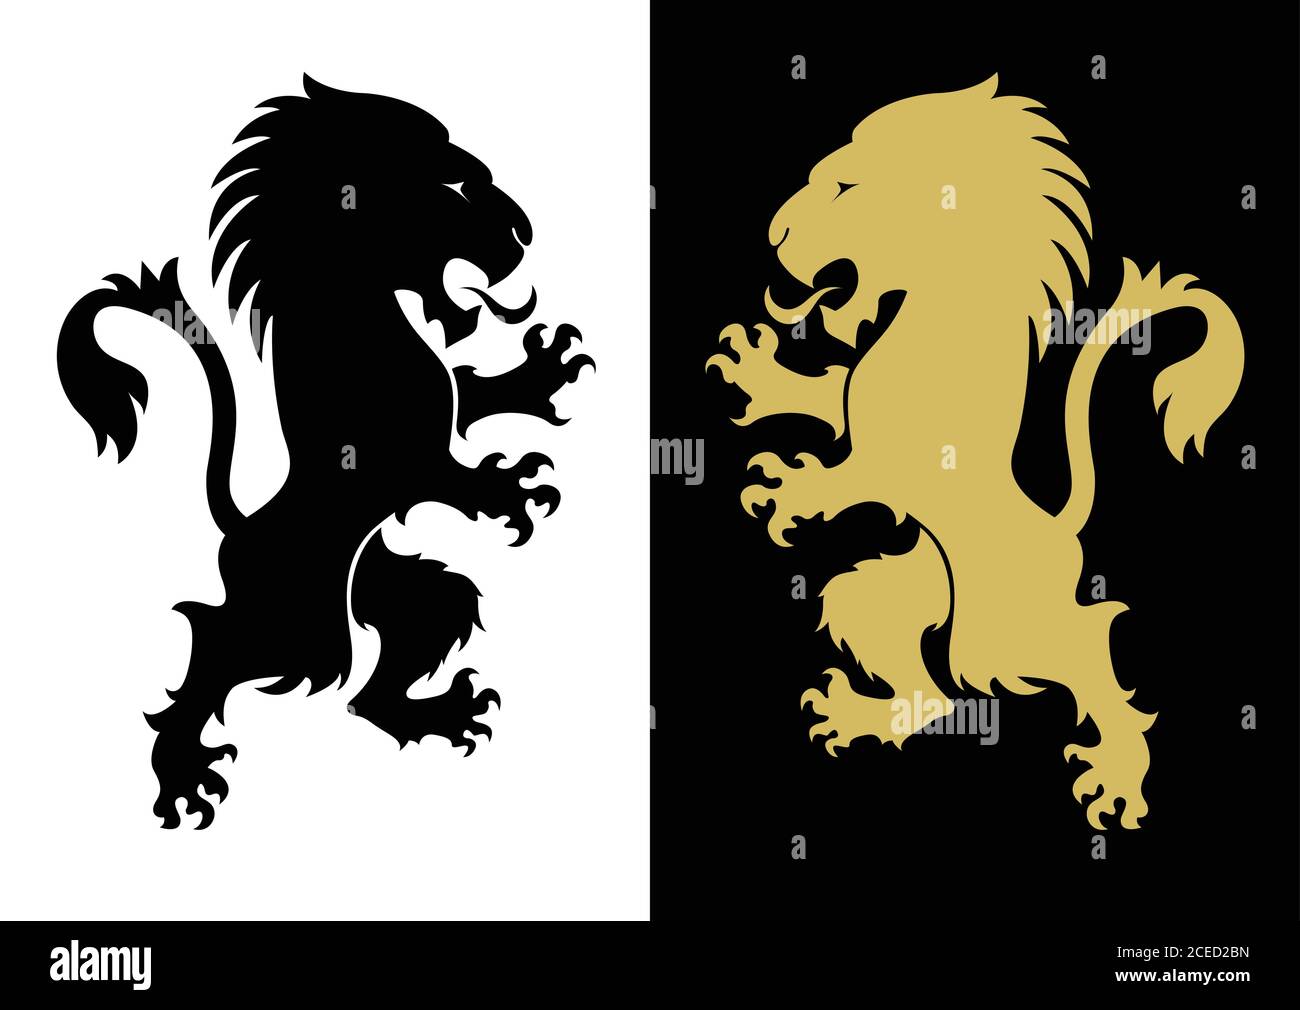 Two heraldic rampant lion silhouettes. Coat of arms. Heraldry logo design element. A lion rampant standing from a coat of arms or heraldic crest. Gold Stock Vector